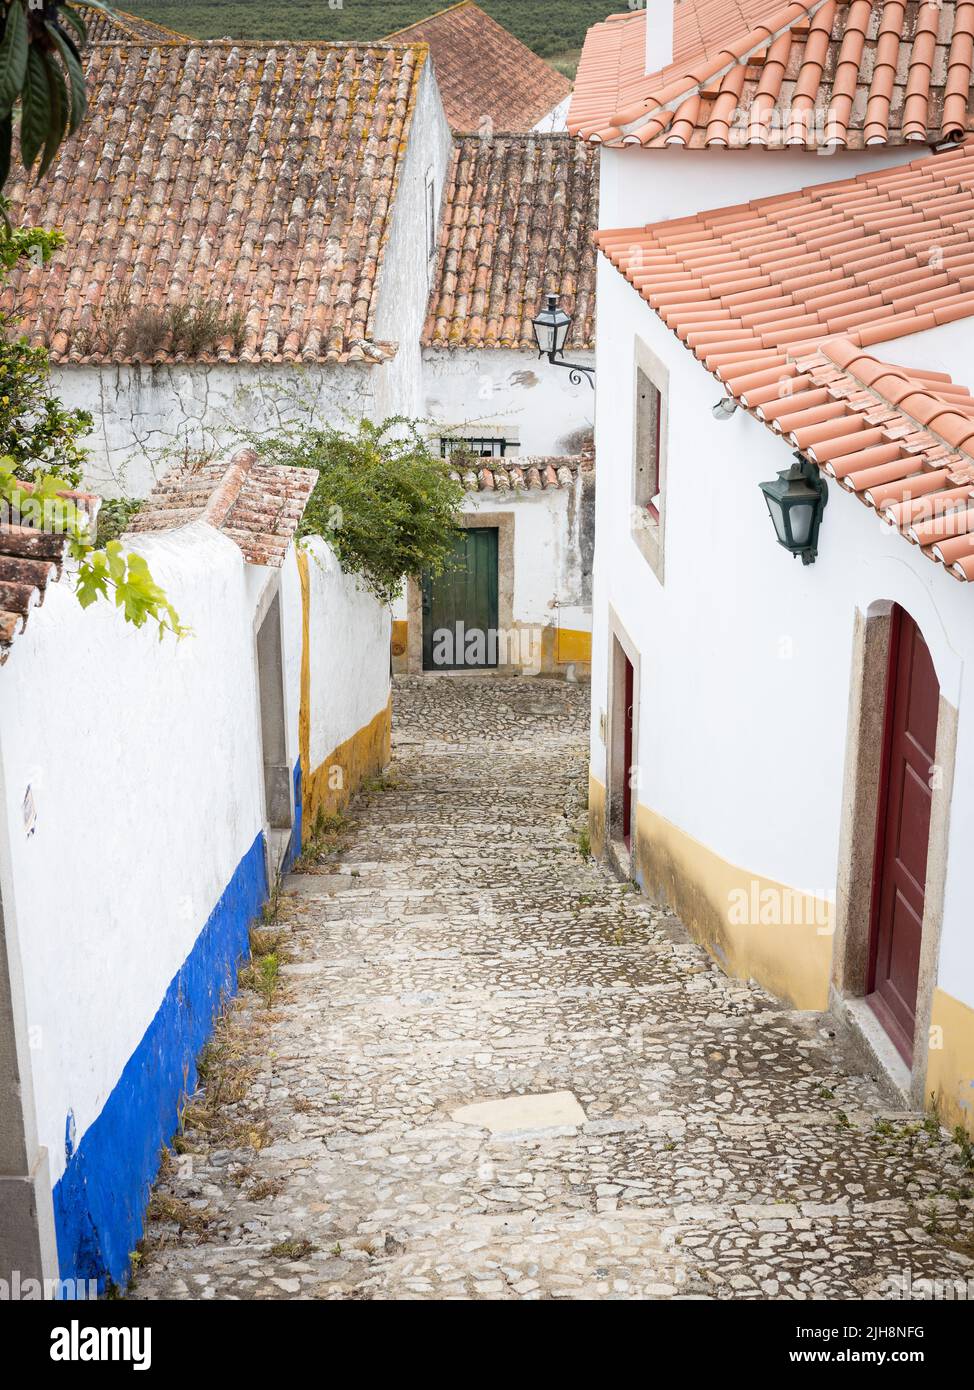 The city of Óbidos, Portugal: Steep alley between old white houses. Stock Photo